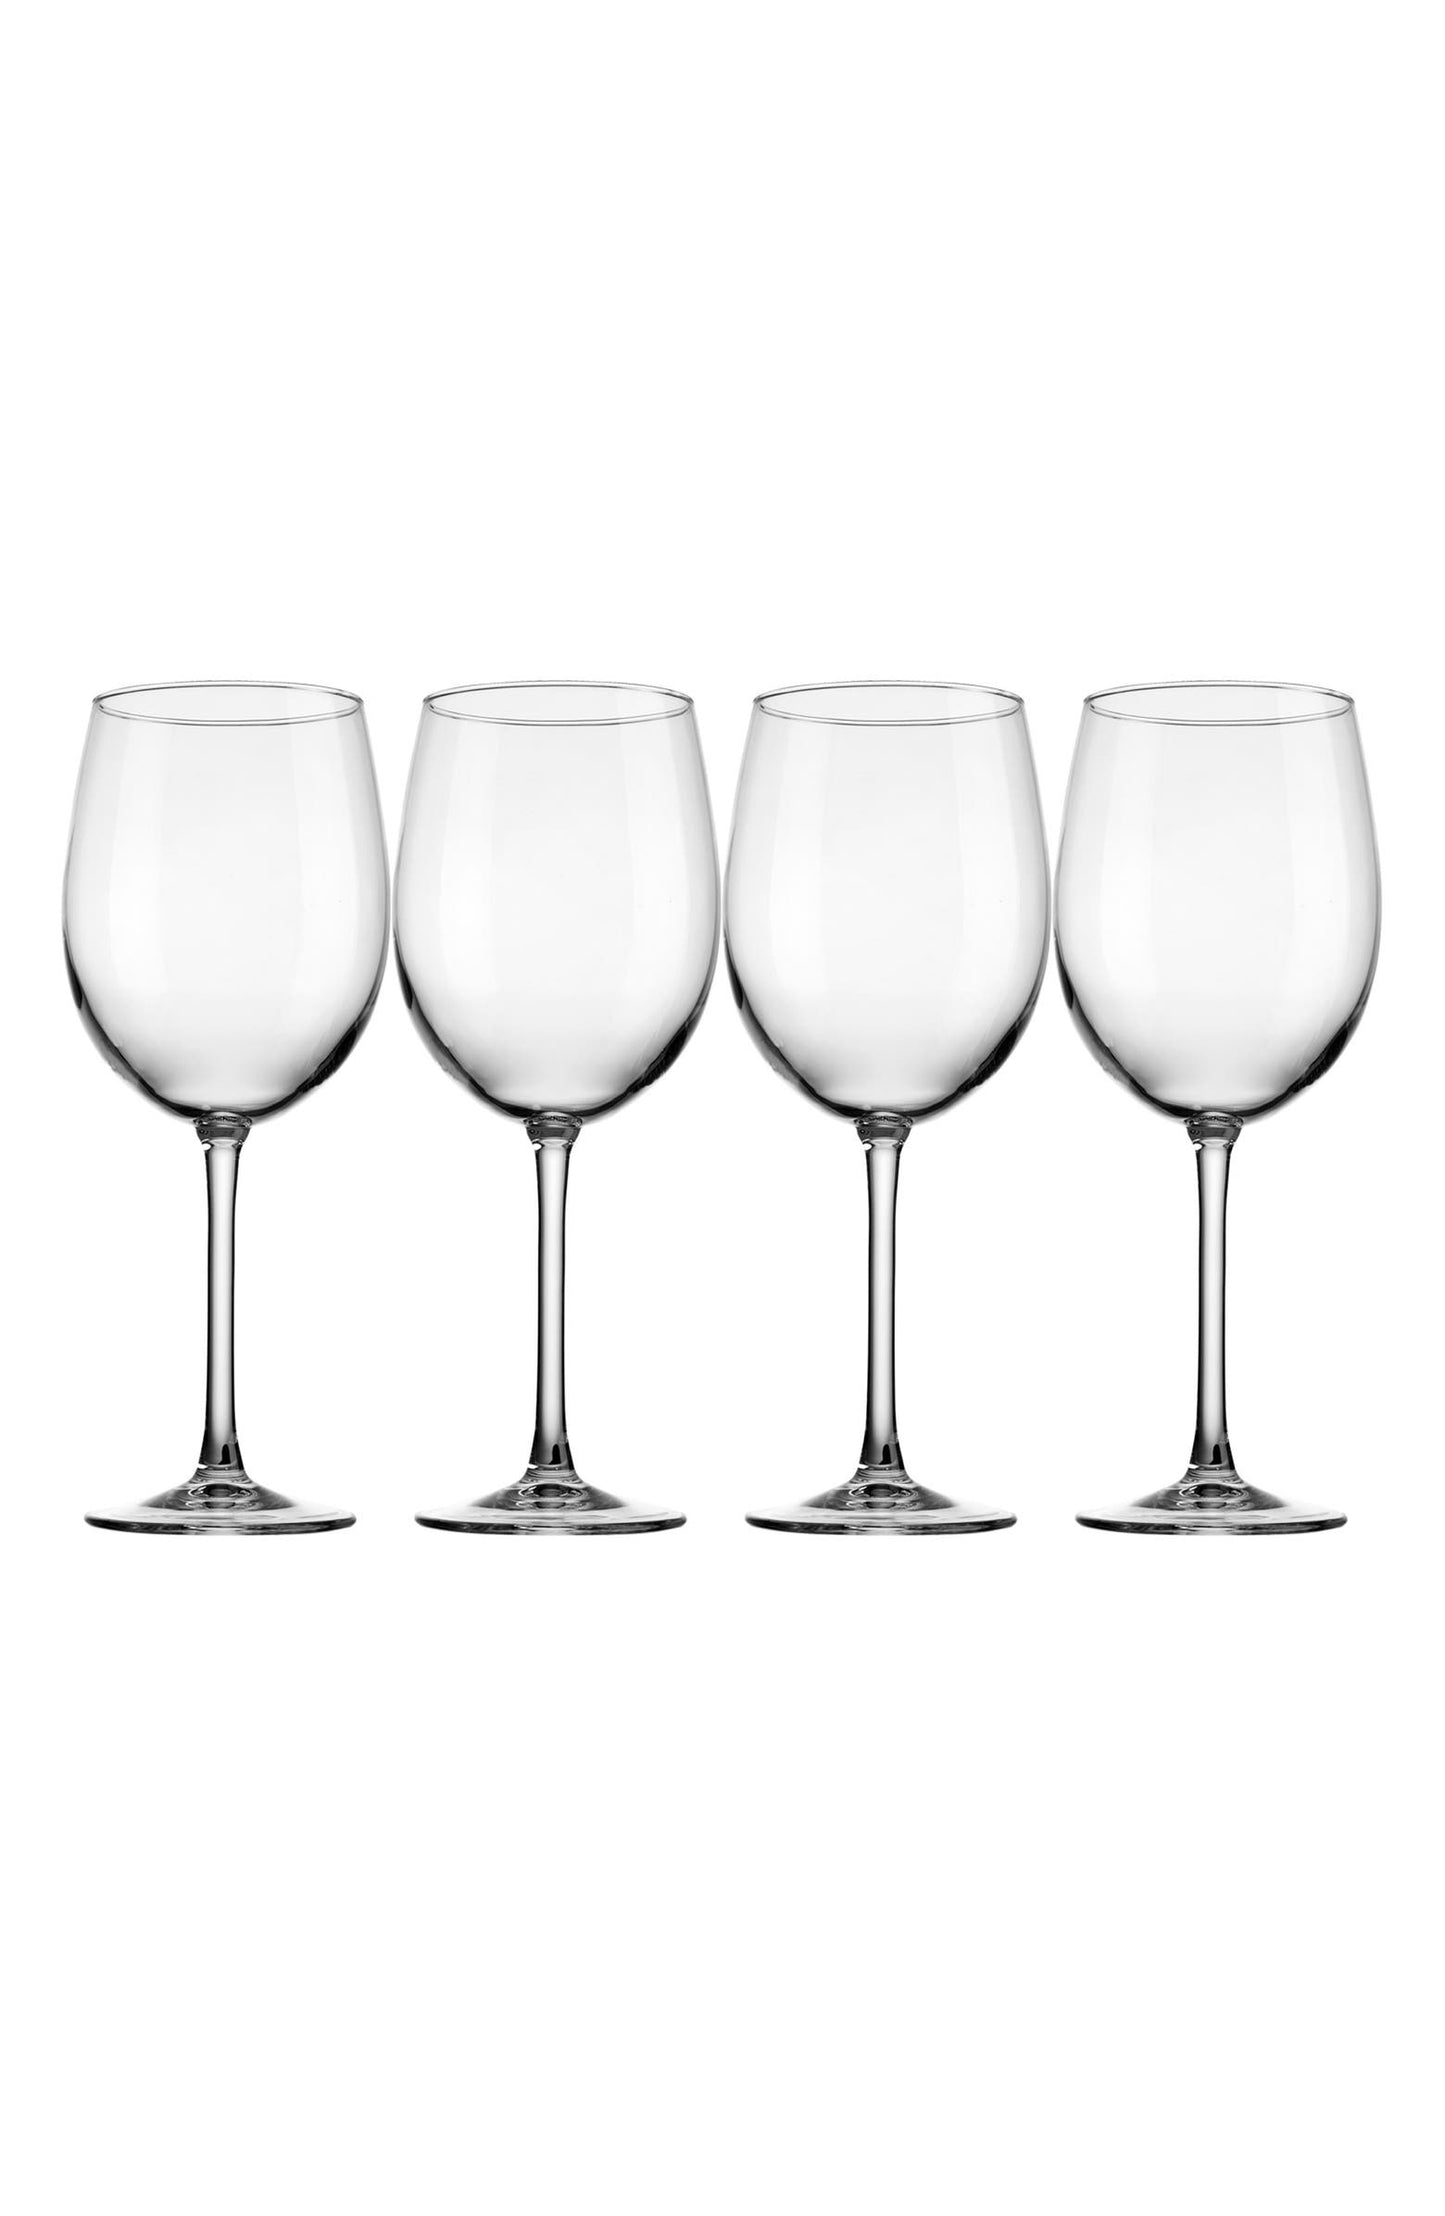 4 empty wine glasses in a row on a white background.